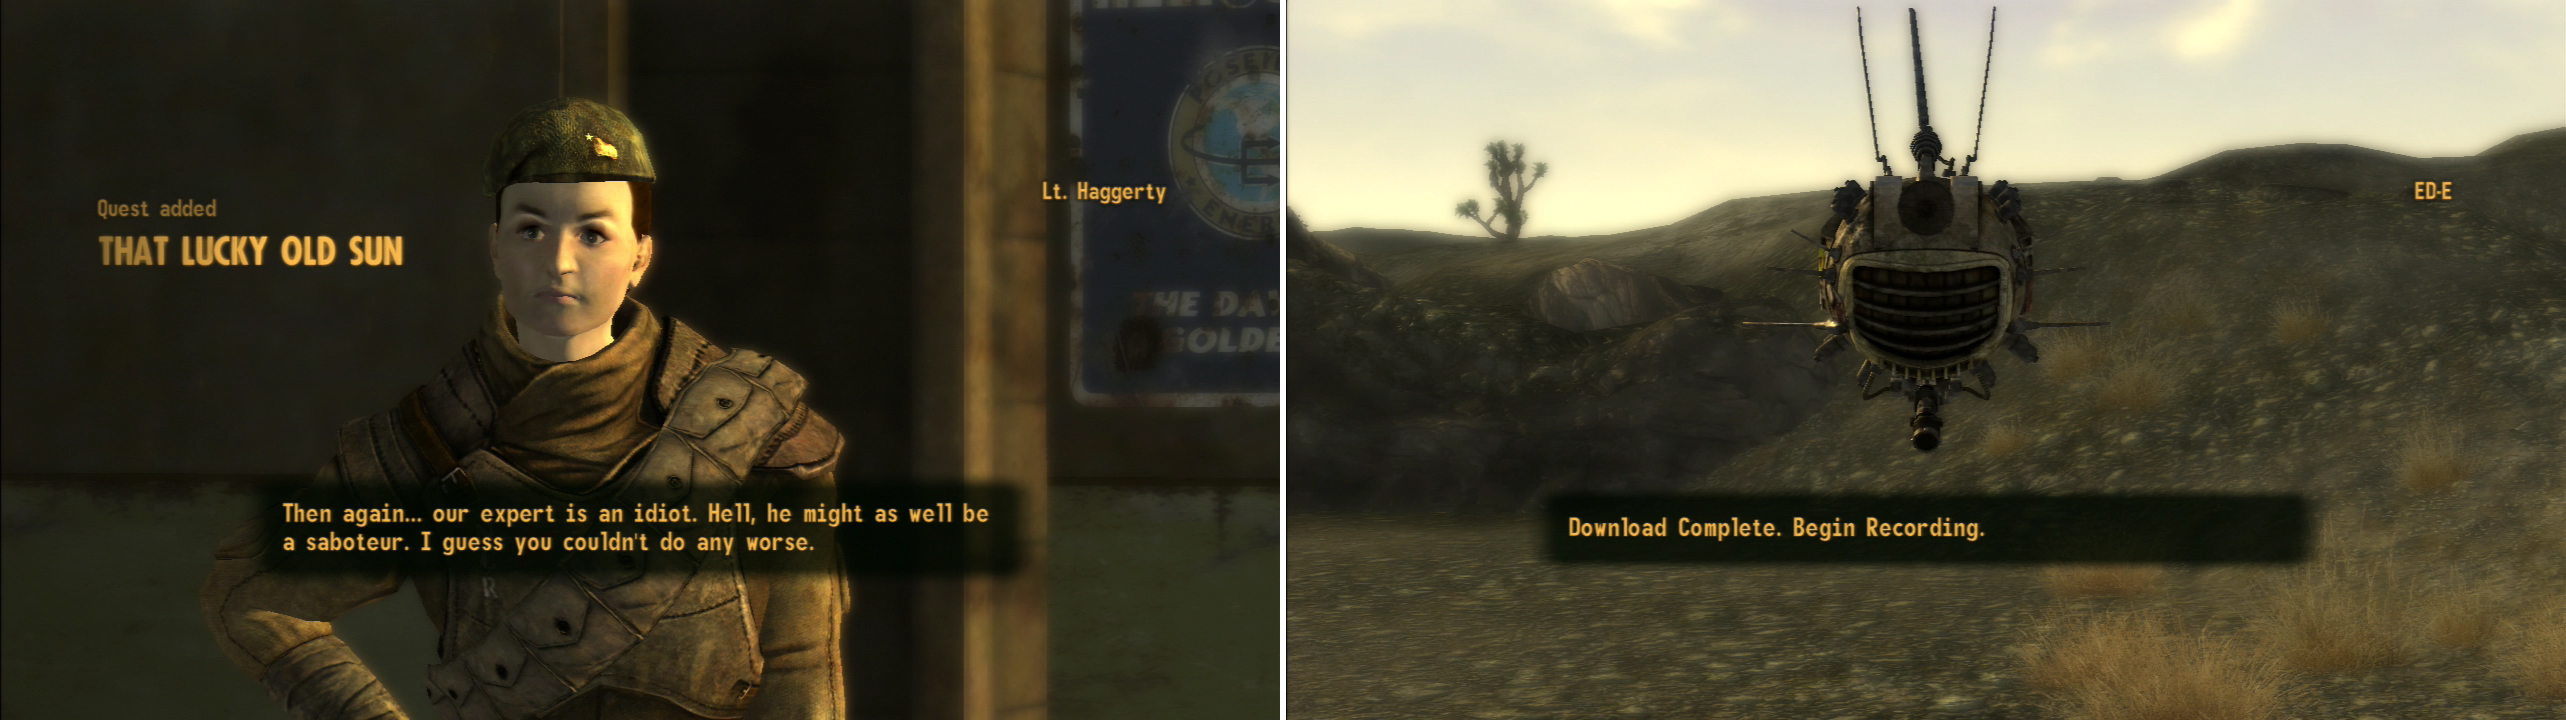 Talk to Lieutenant Haggerty outside to find out that all is not well with HELIOS One (left). Talking to the NCR Troopers outside of HELIOS One will trigger one of ED-E’s recordings (right).